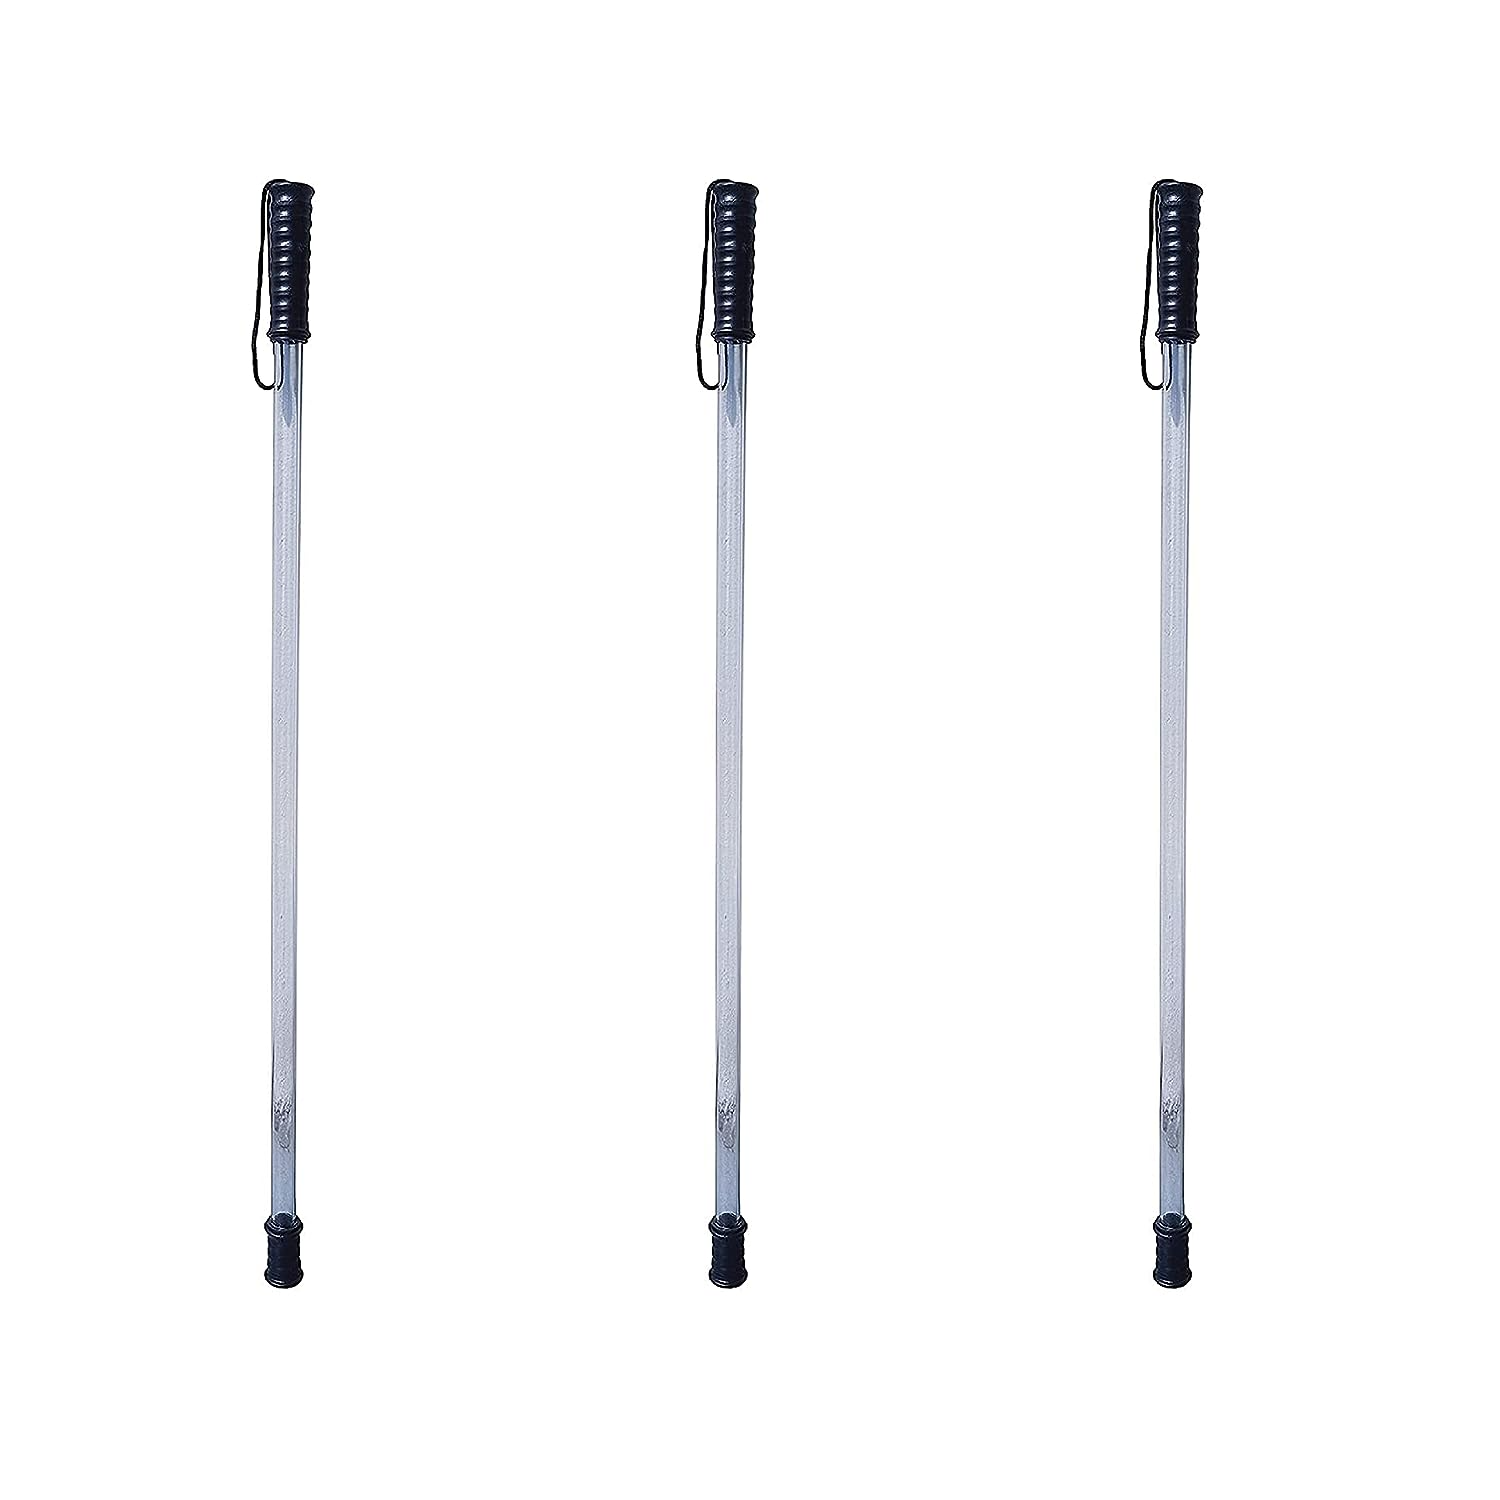 robustt-polycarbonate-security-stick-high-impact-resistance-durable-anti-slip-bottom-security-stick-pack-of-3